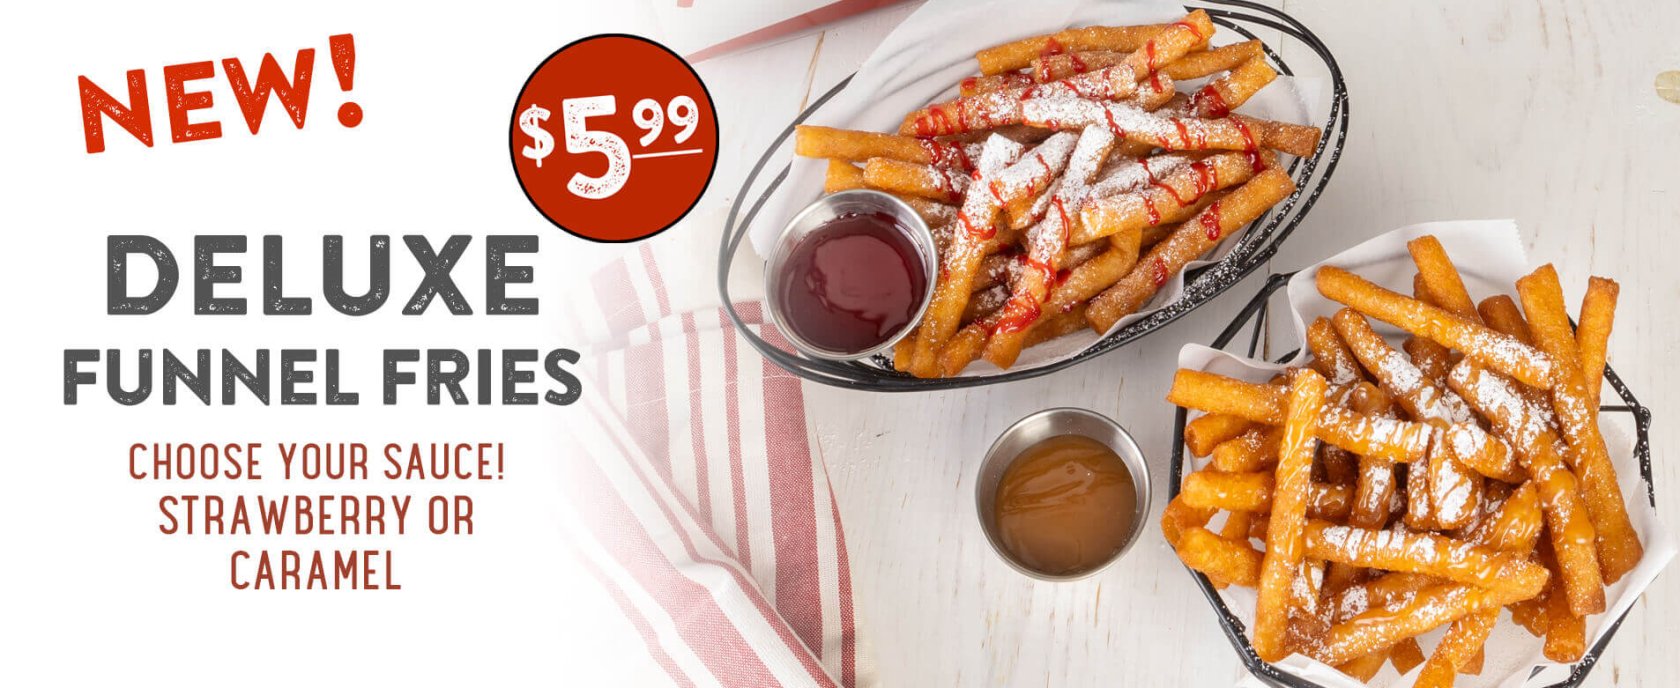 New Deluxe Funnel Fries! - $5.99